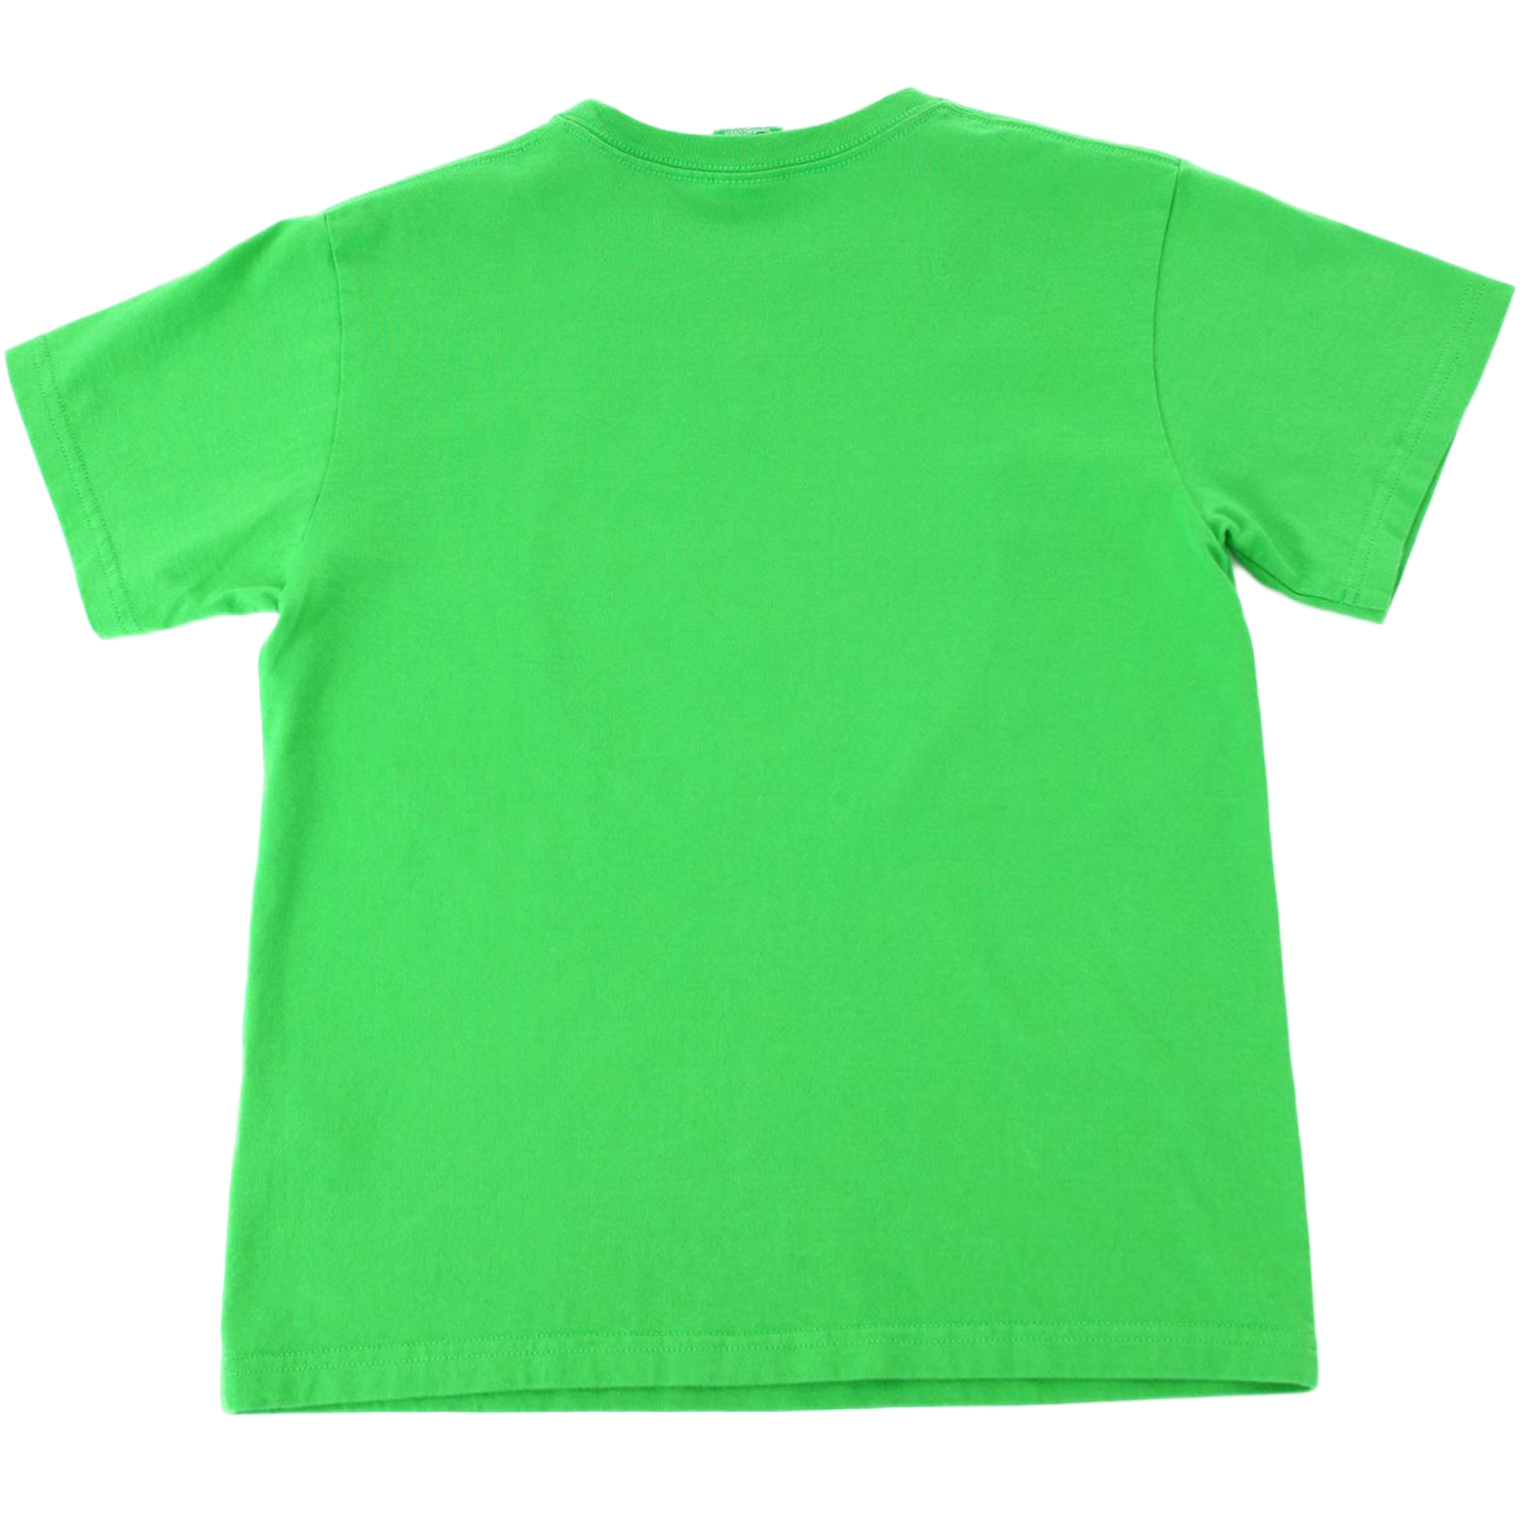 Undercover Green kids spacecow t-shirt